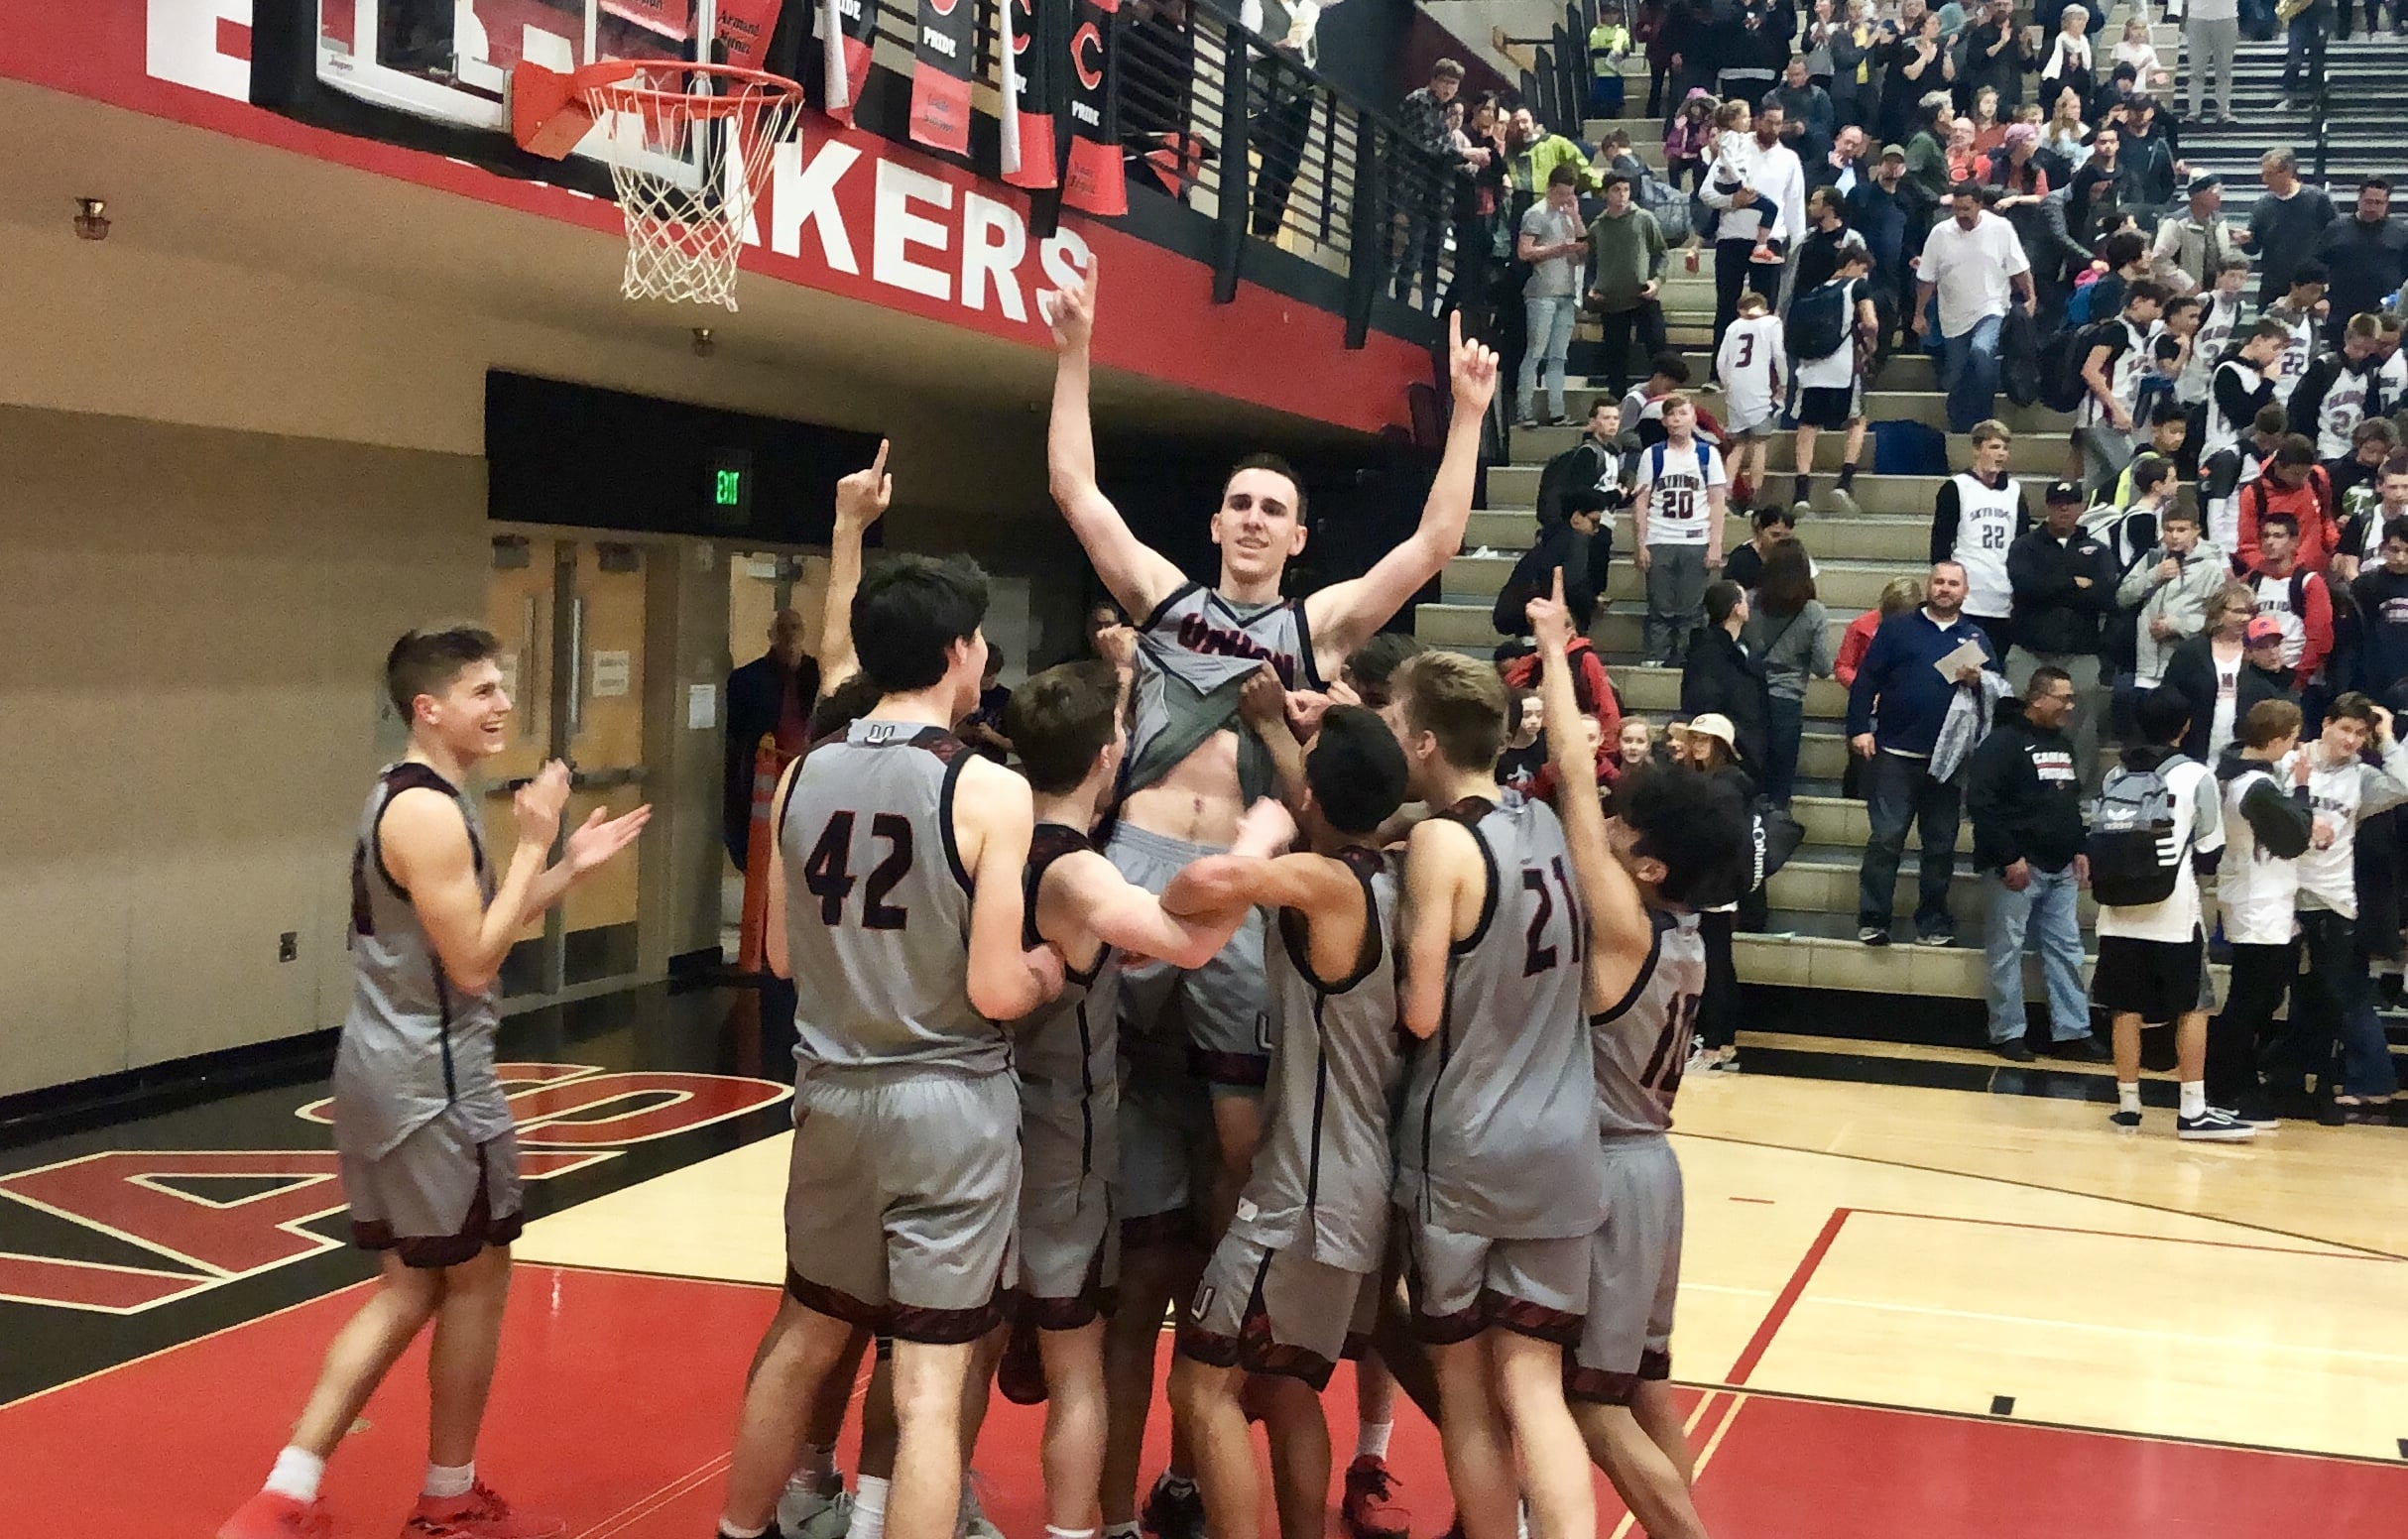 The Union boys basketball team lifts up Ethan Smith moments after an 82-68 win over Camas in which he hit a school-record eight 3-pointers on Friday night at Camas High School.